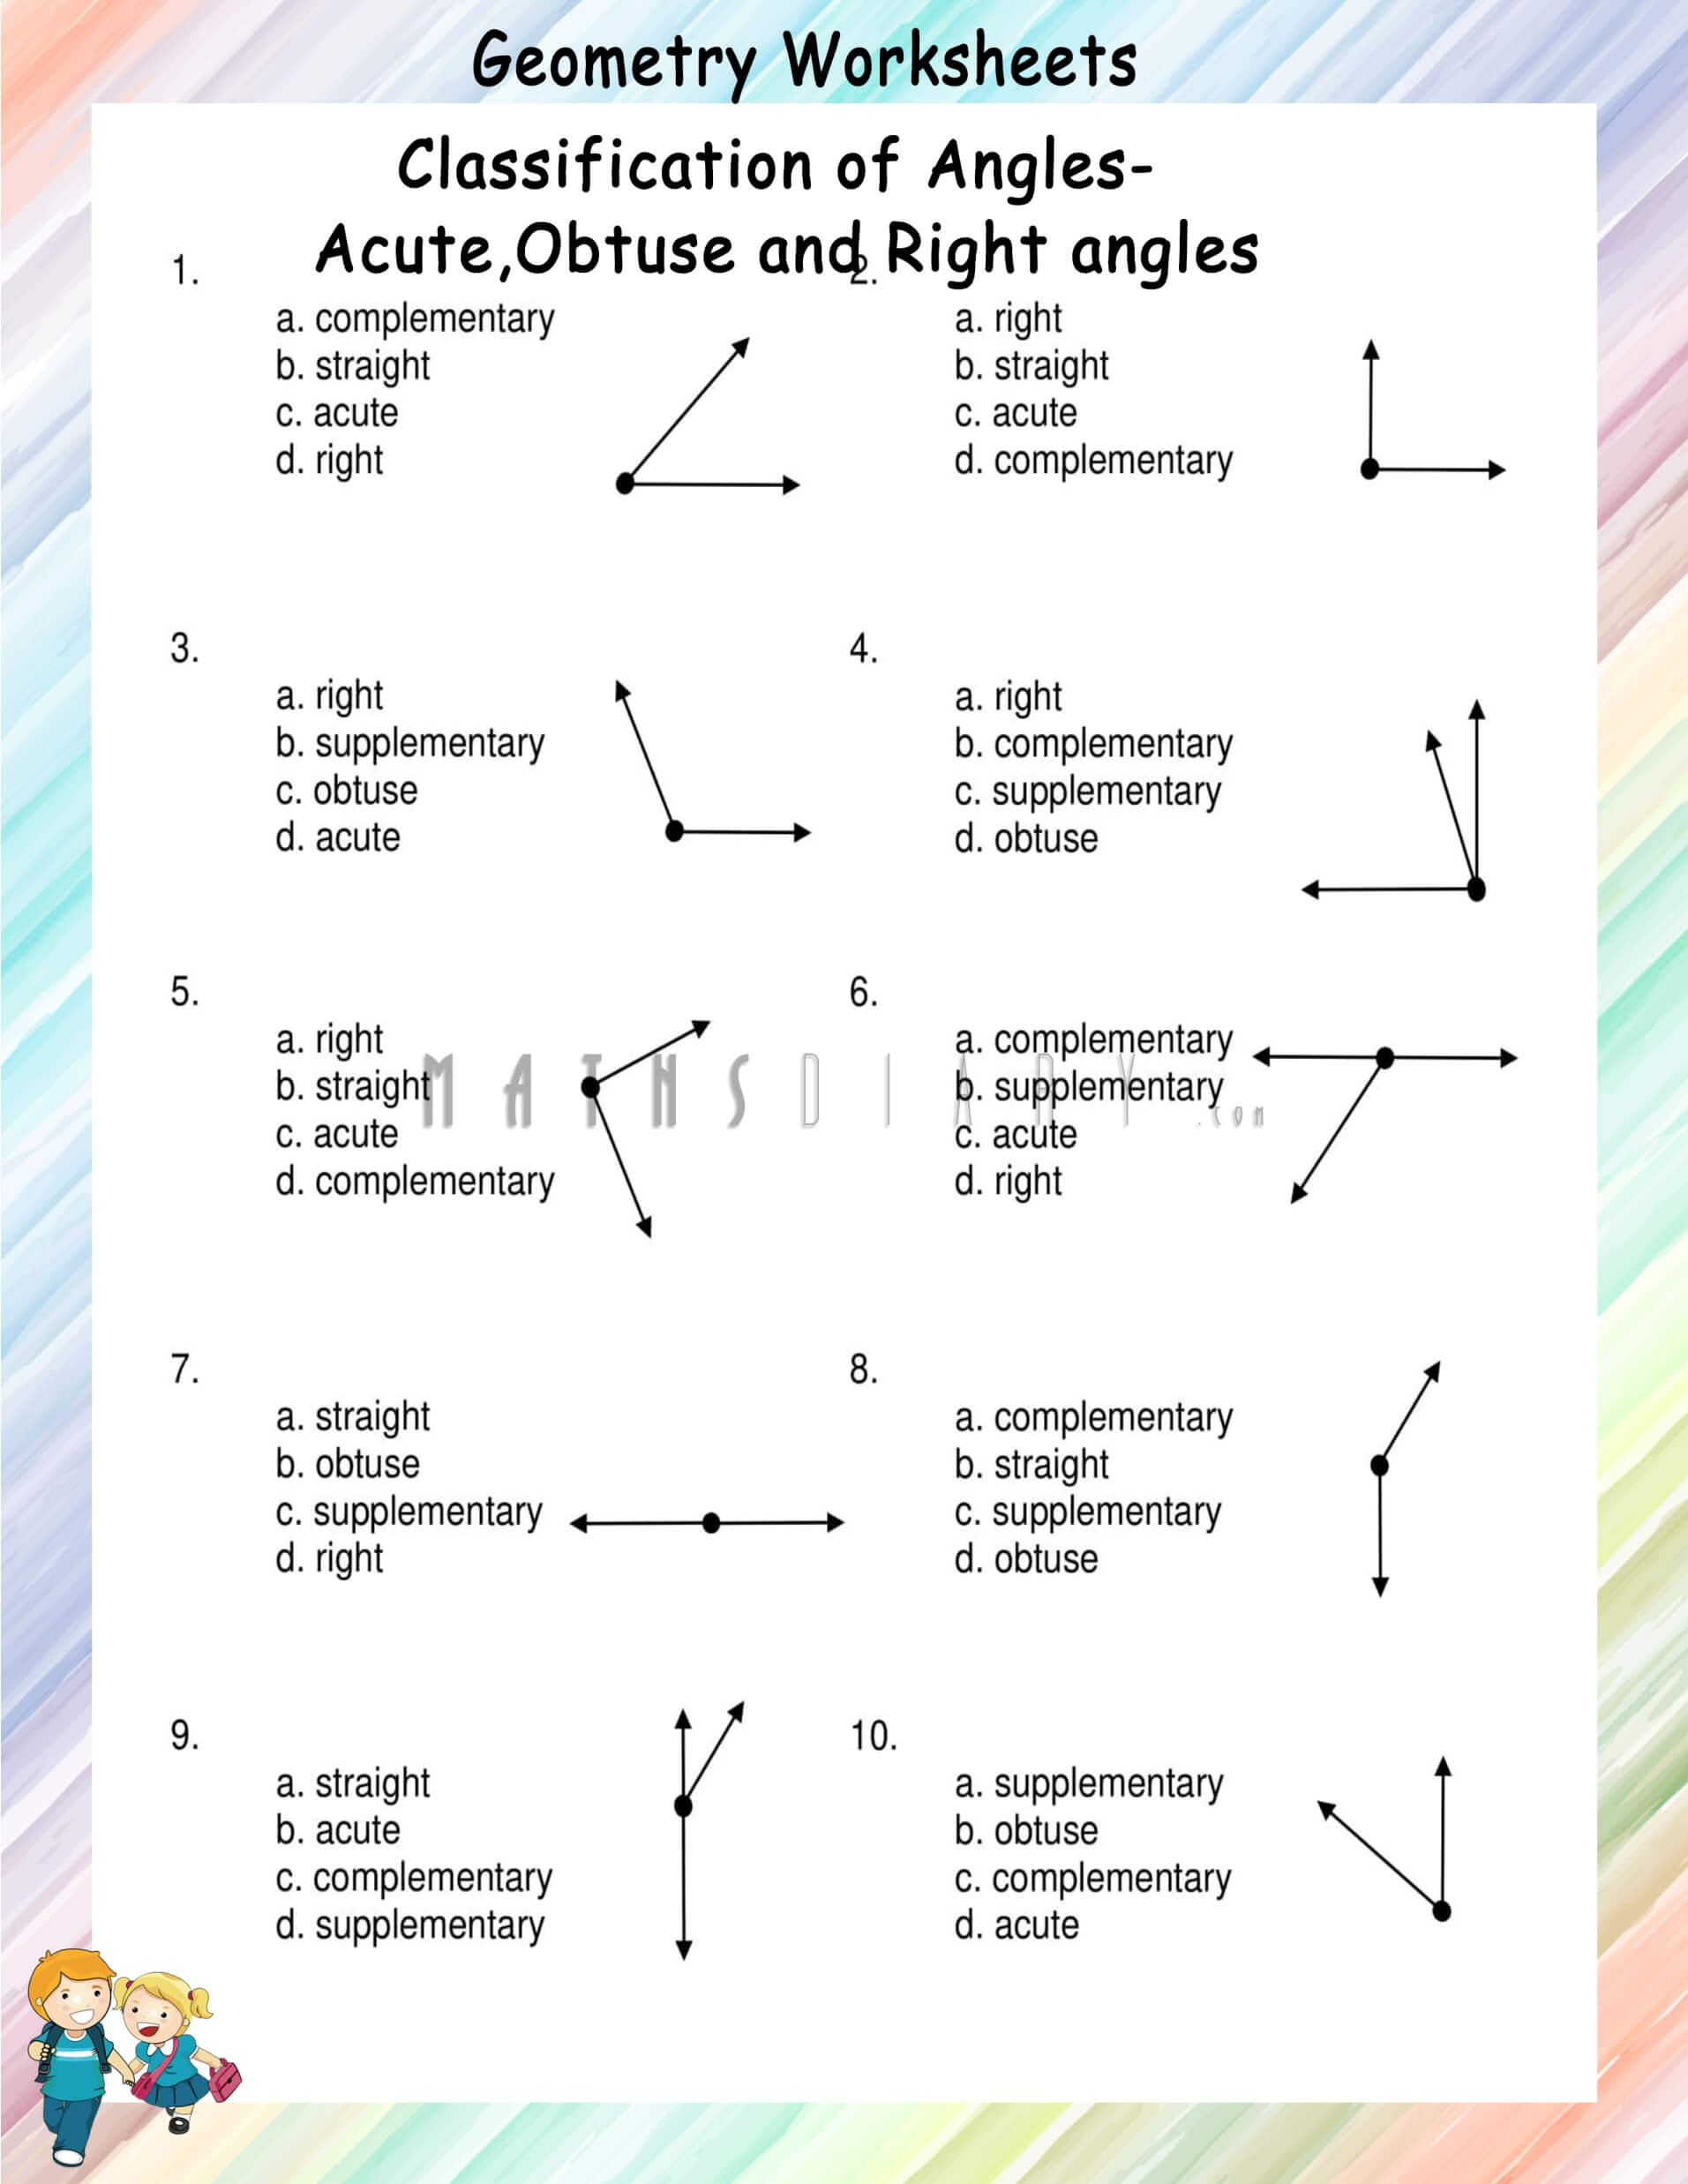 Classification of angles worksheets Math Worksheets MathsDiary com